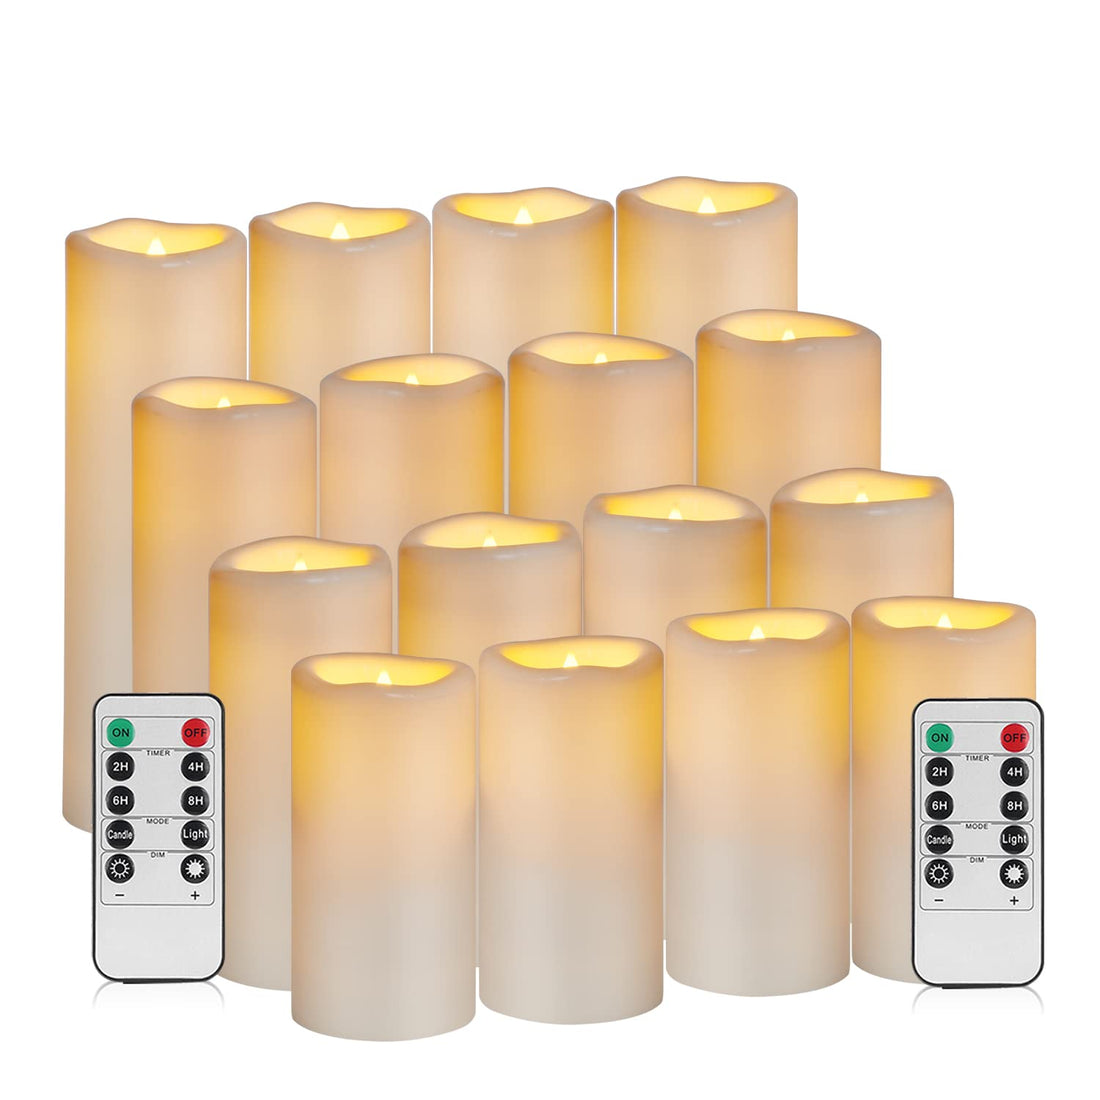 OFUNIC Waterproof Flickering Flameless Candles, Set of 16 Waterproof Battery Operated Candles, D2.2 LED Candles, Outdoor Indoor Plastic Pillar Candles (D2.2 Set of 16 Waterproof Candles)